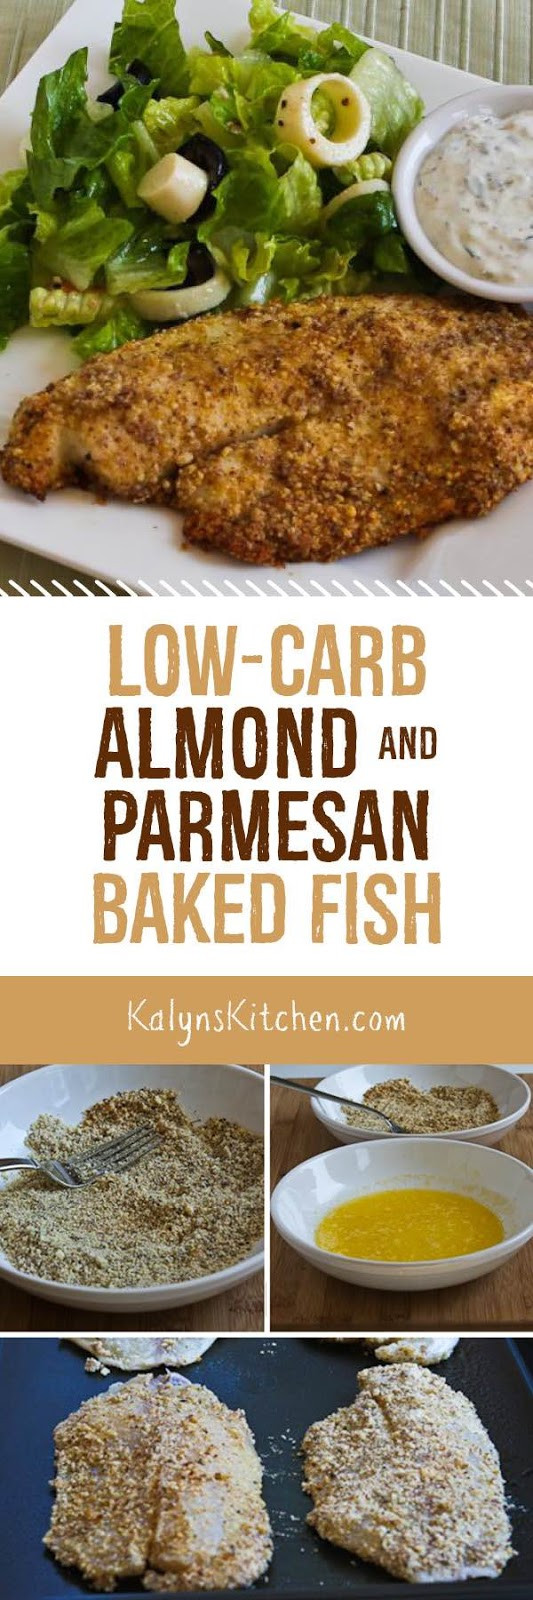 Low Carb Baked Fish Recipes
 Low Carb Almond and Parmesan Baked Fish Kalyn s Kitchen